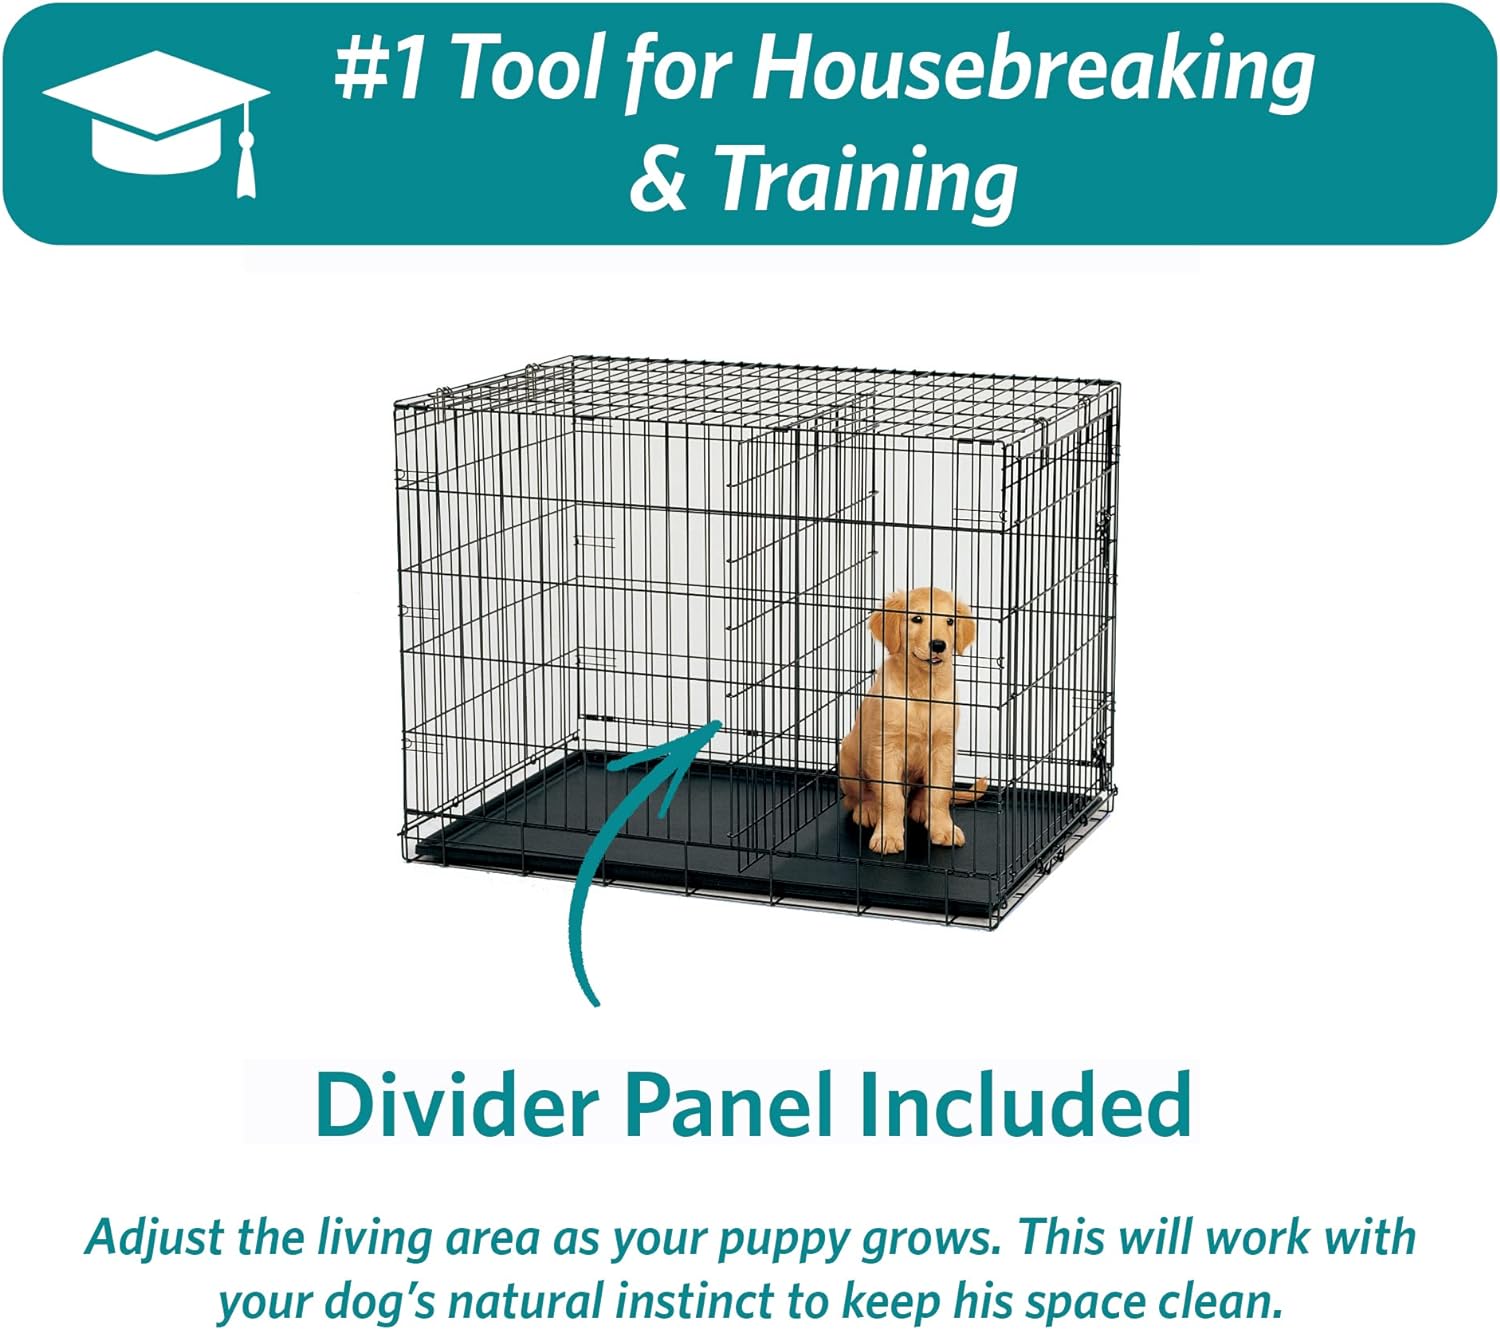 MidWest Homes for Pets Newly Enhanced Double Door iCrate Dog Crate, Includes Leak-Proof Pan, Floor Protecting Feet, Divider Panel & New Patented Features